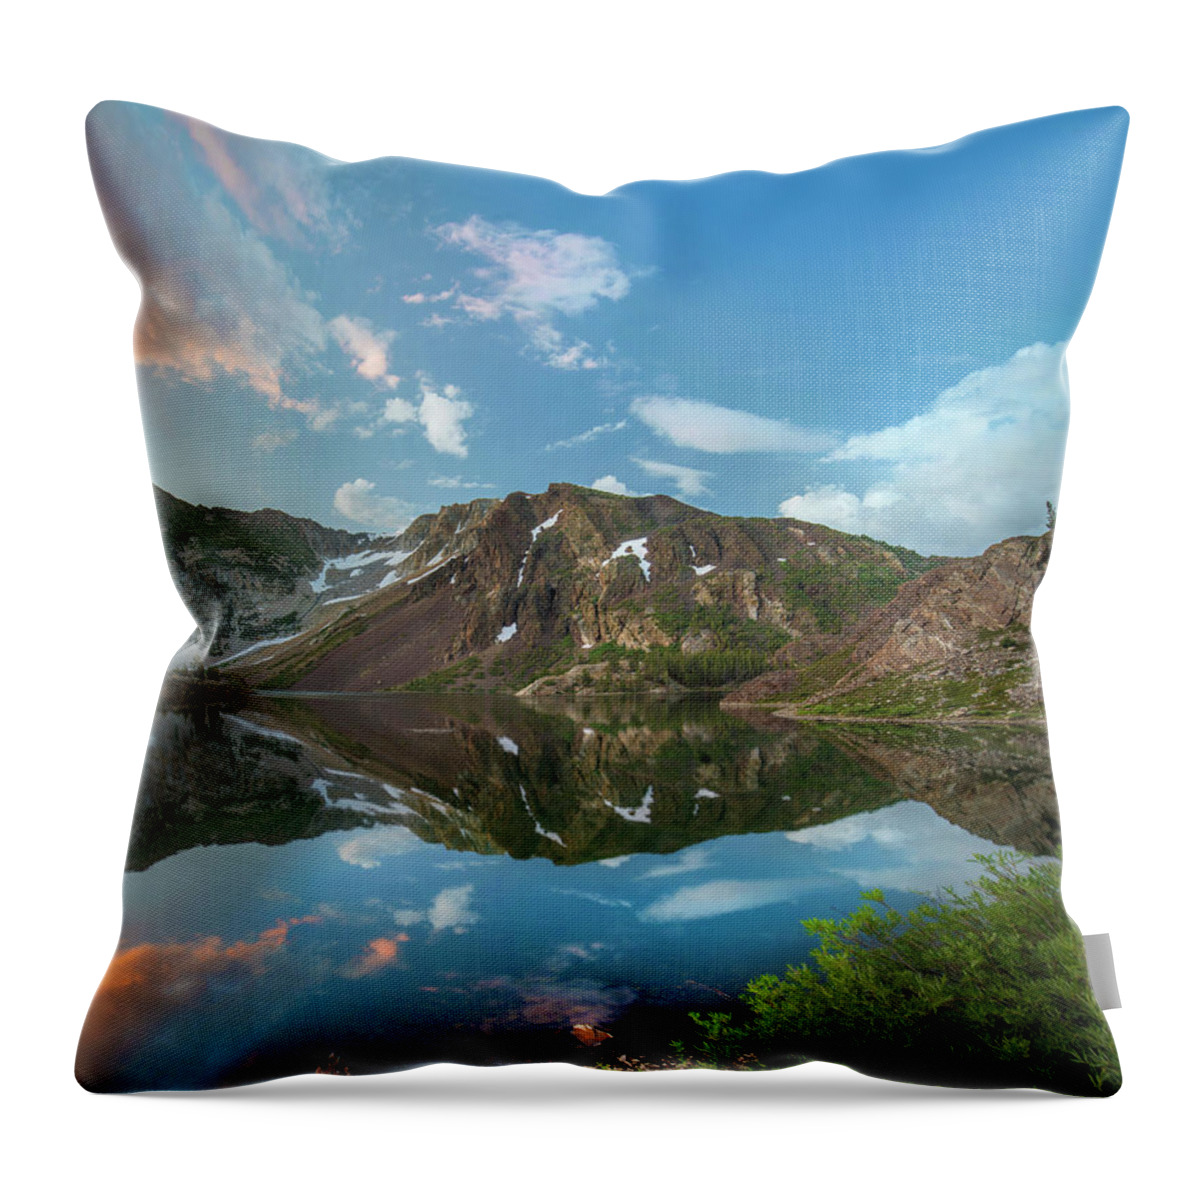 00574875 Throw Pillow featuring the photograph Dana Plateau From Ellery Lake, Inyo by Tim Fitzharris